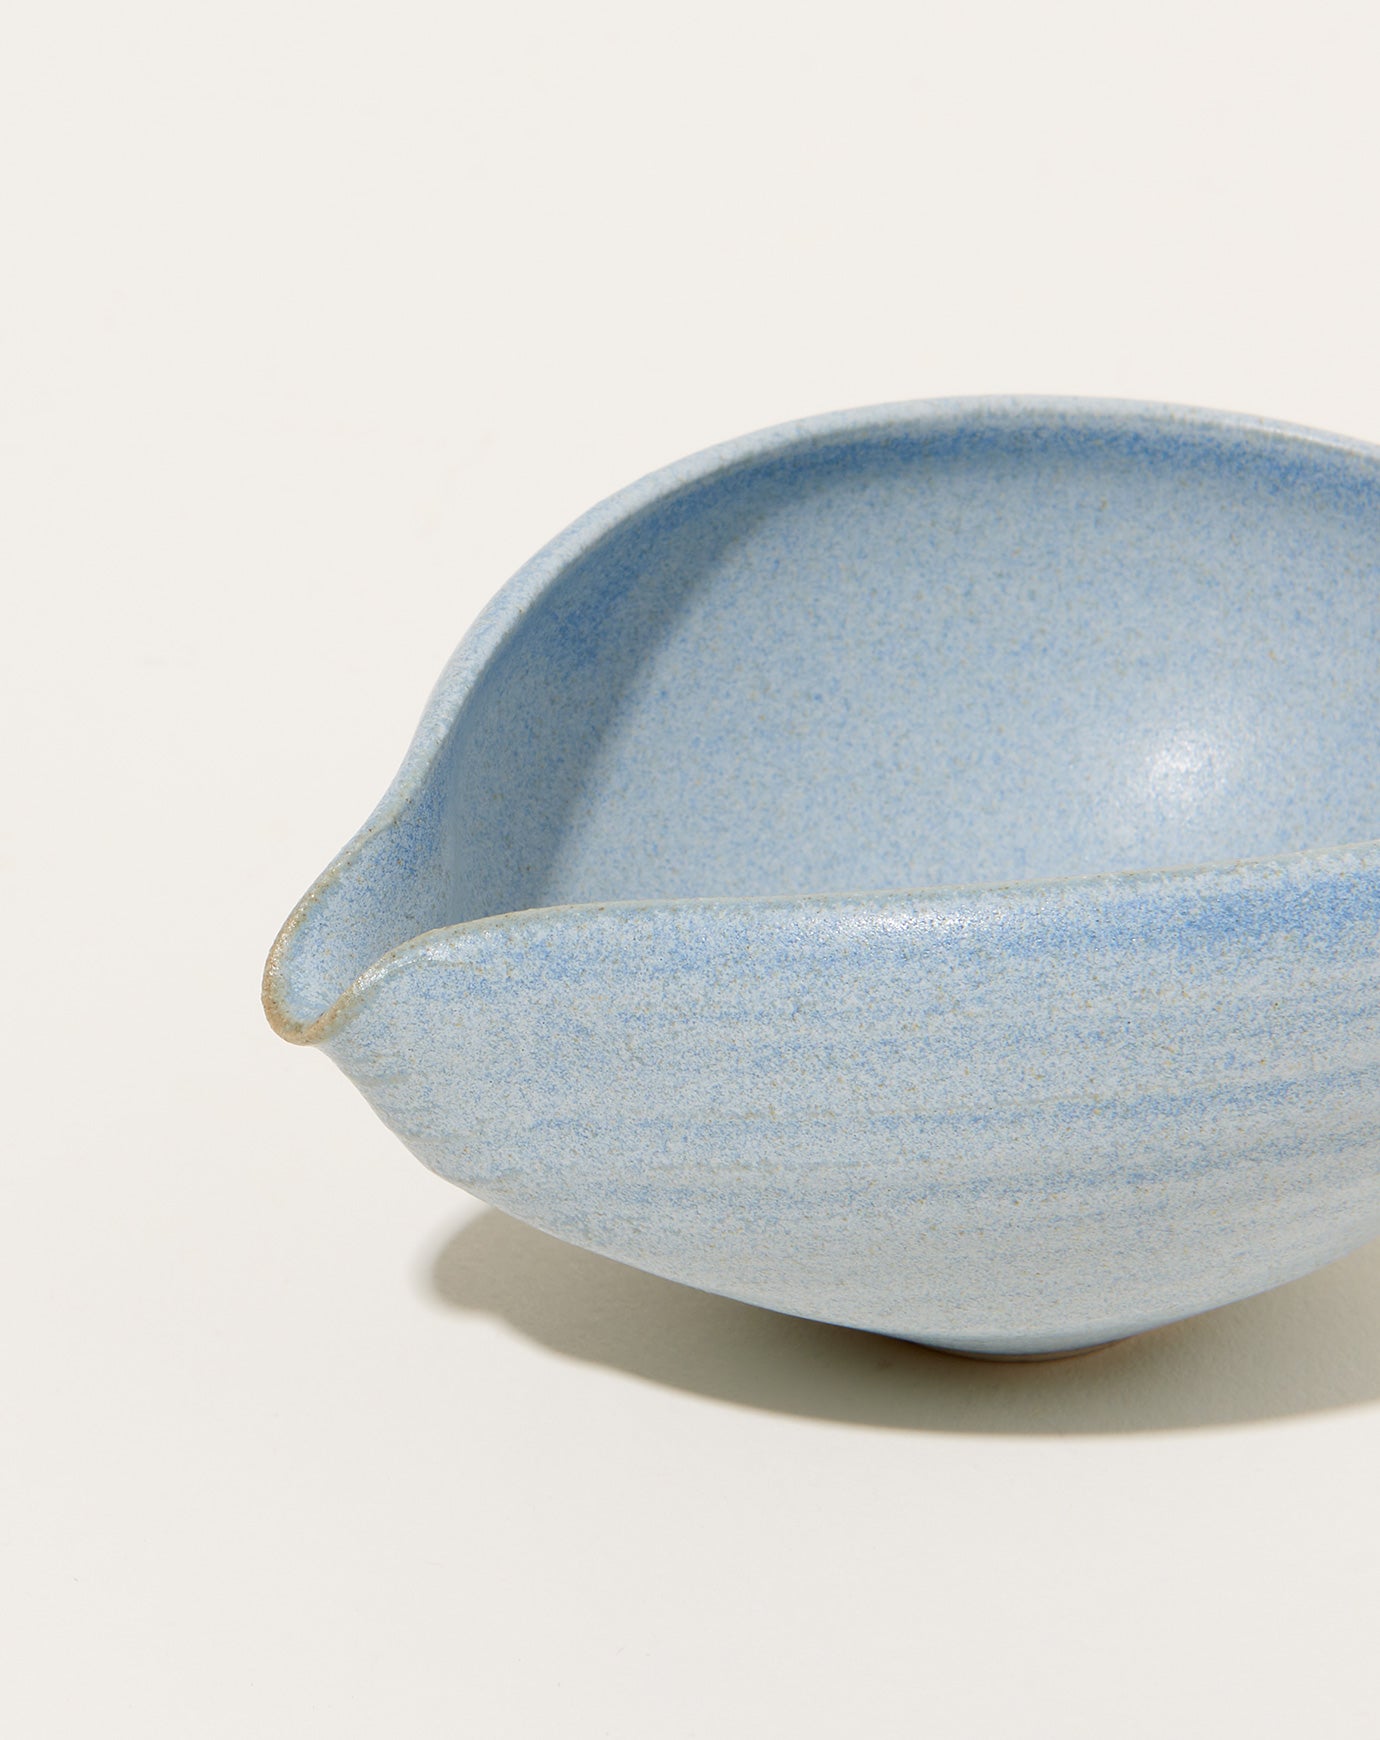 Monohanako Spouted Egg Bowl in Blue Jeans